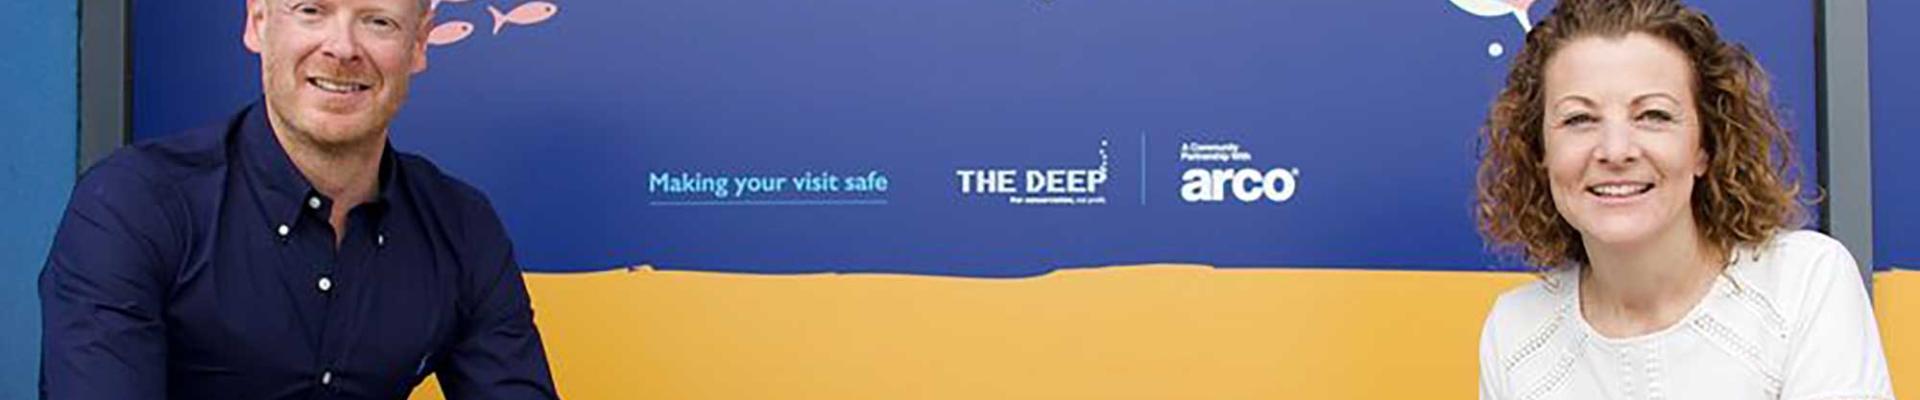 The Deep Opens Doors to the Public With Support From Local Company Arco